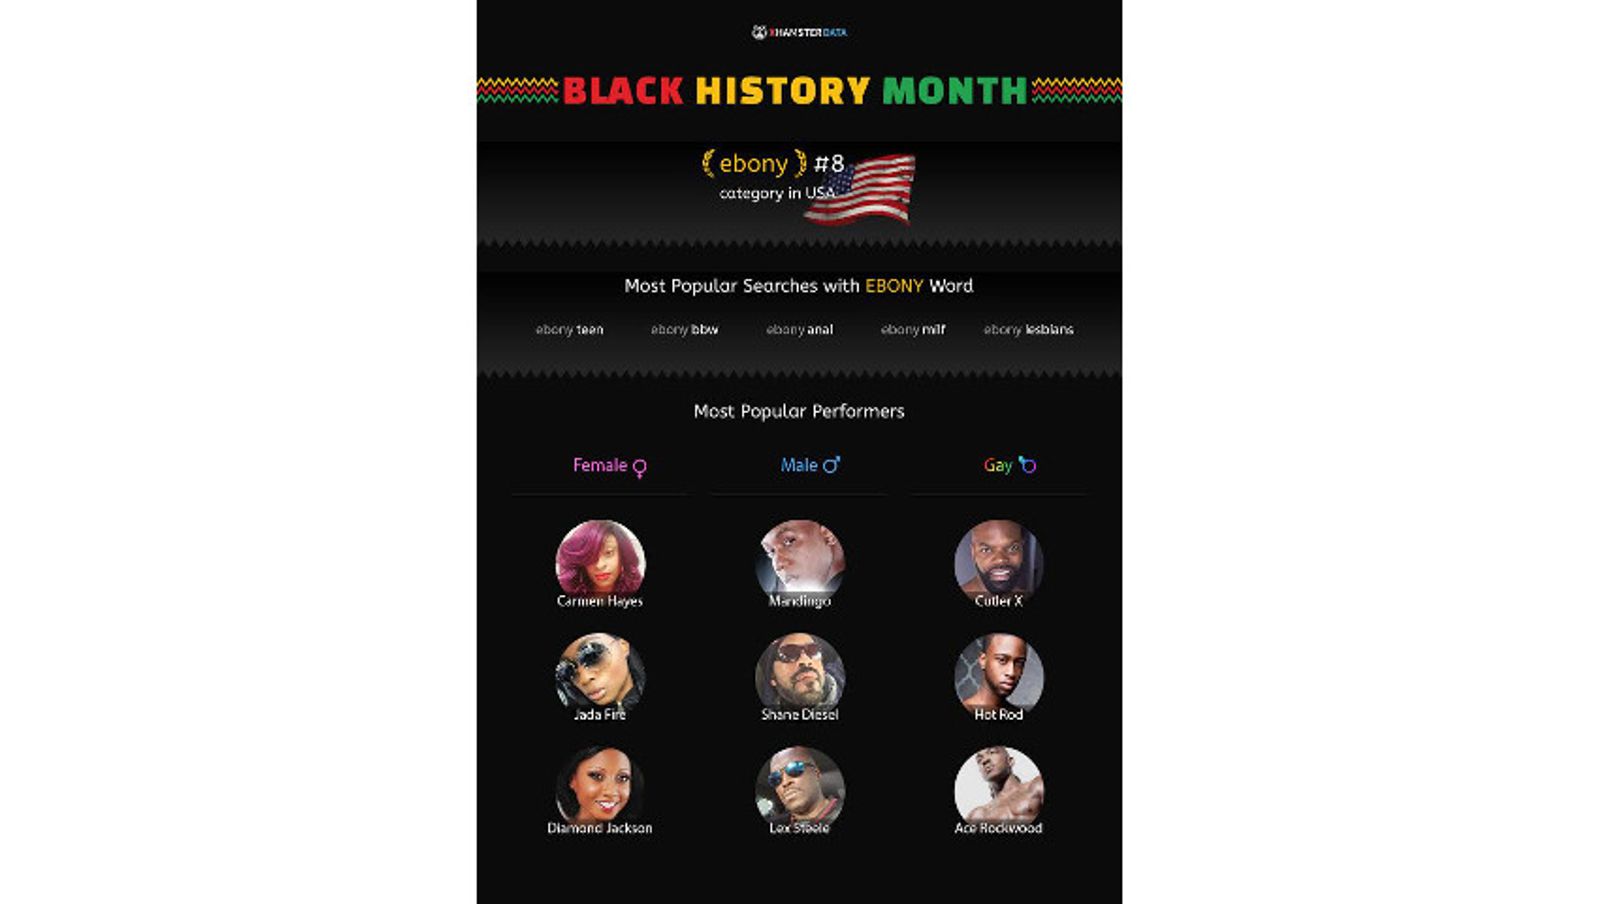 xHamster Honors Black History Month With Popular Ebony Star Listings